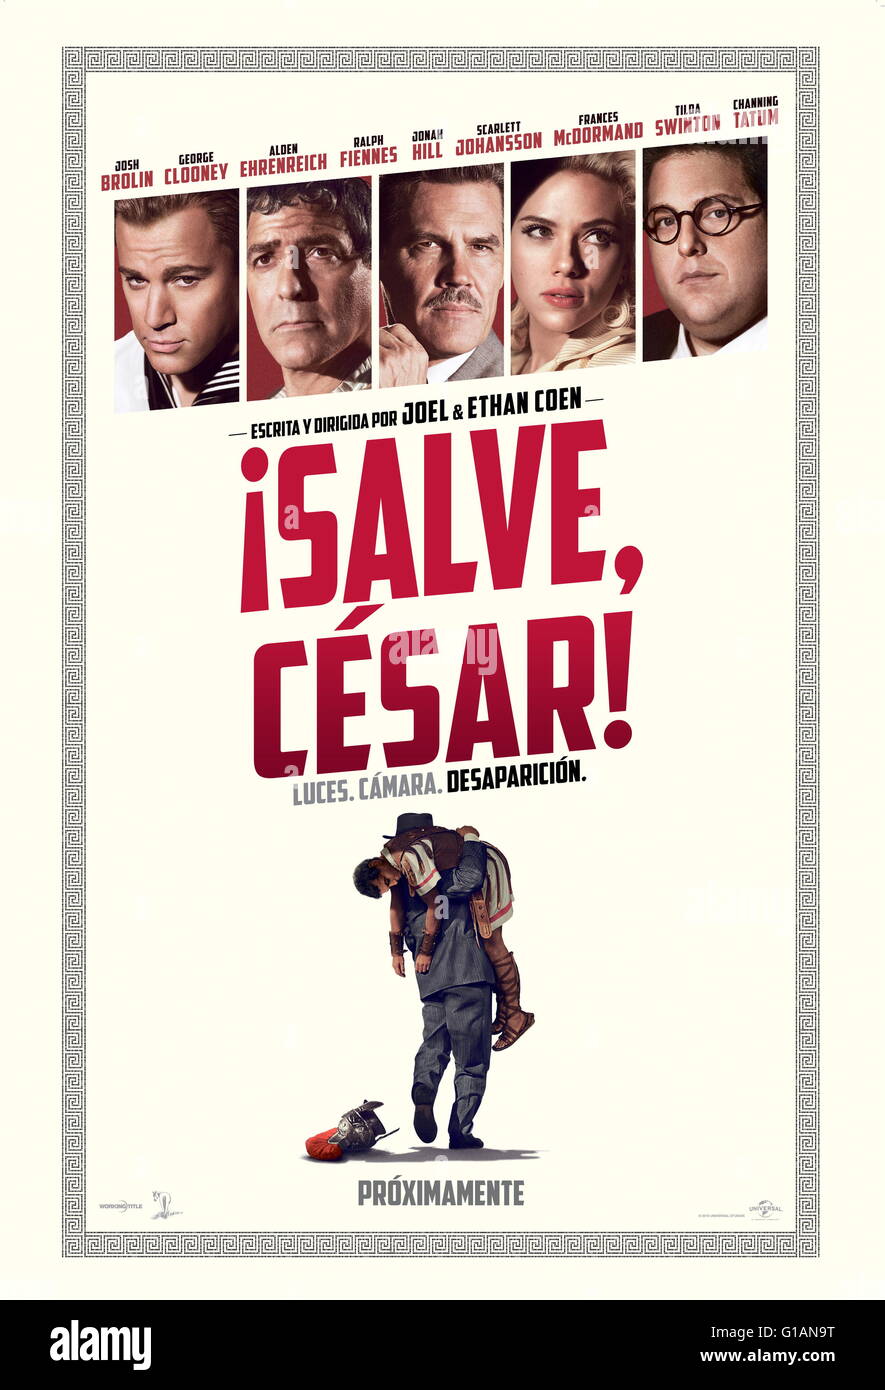 RELEASE DATE: February 5, 2016 TITLE: Hail, Caesar! STUDIO: Universal Pictures DIRECTOR: Ethan Coen, Joel Coen PLOT: A Hollywood fixer in the 1950s works to keep the studio's stars in line PICTURED: Poster Art (Credit: c Universal Pictures/Entertainment Pictures/) Stock Photo